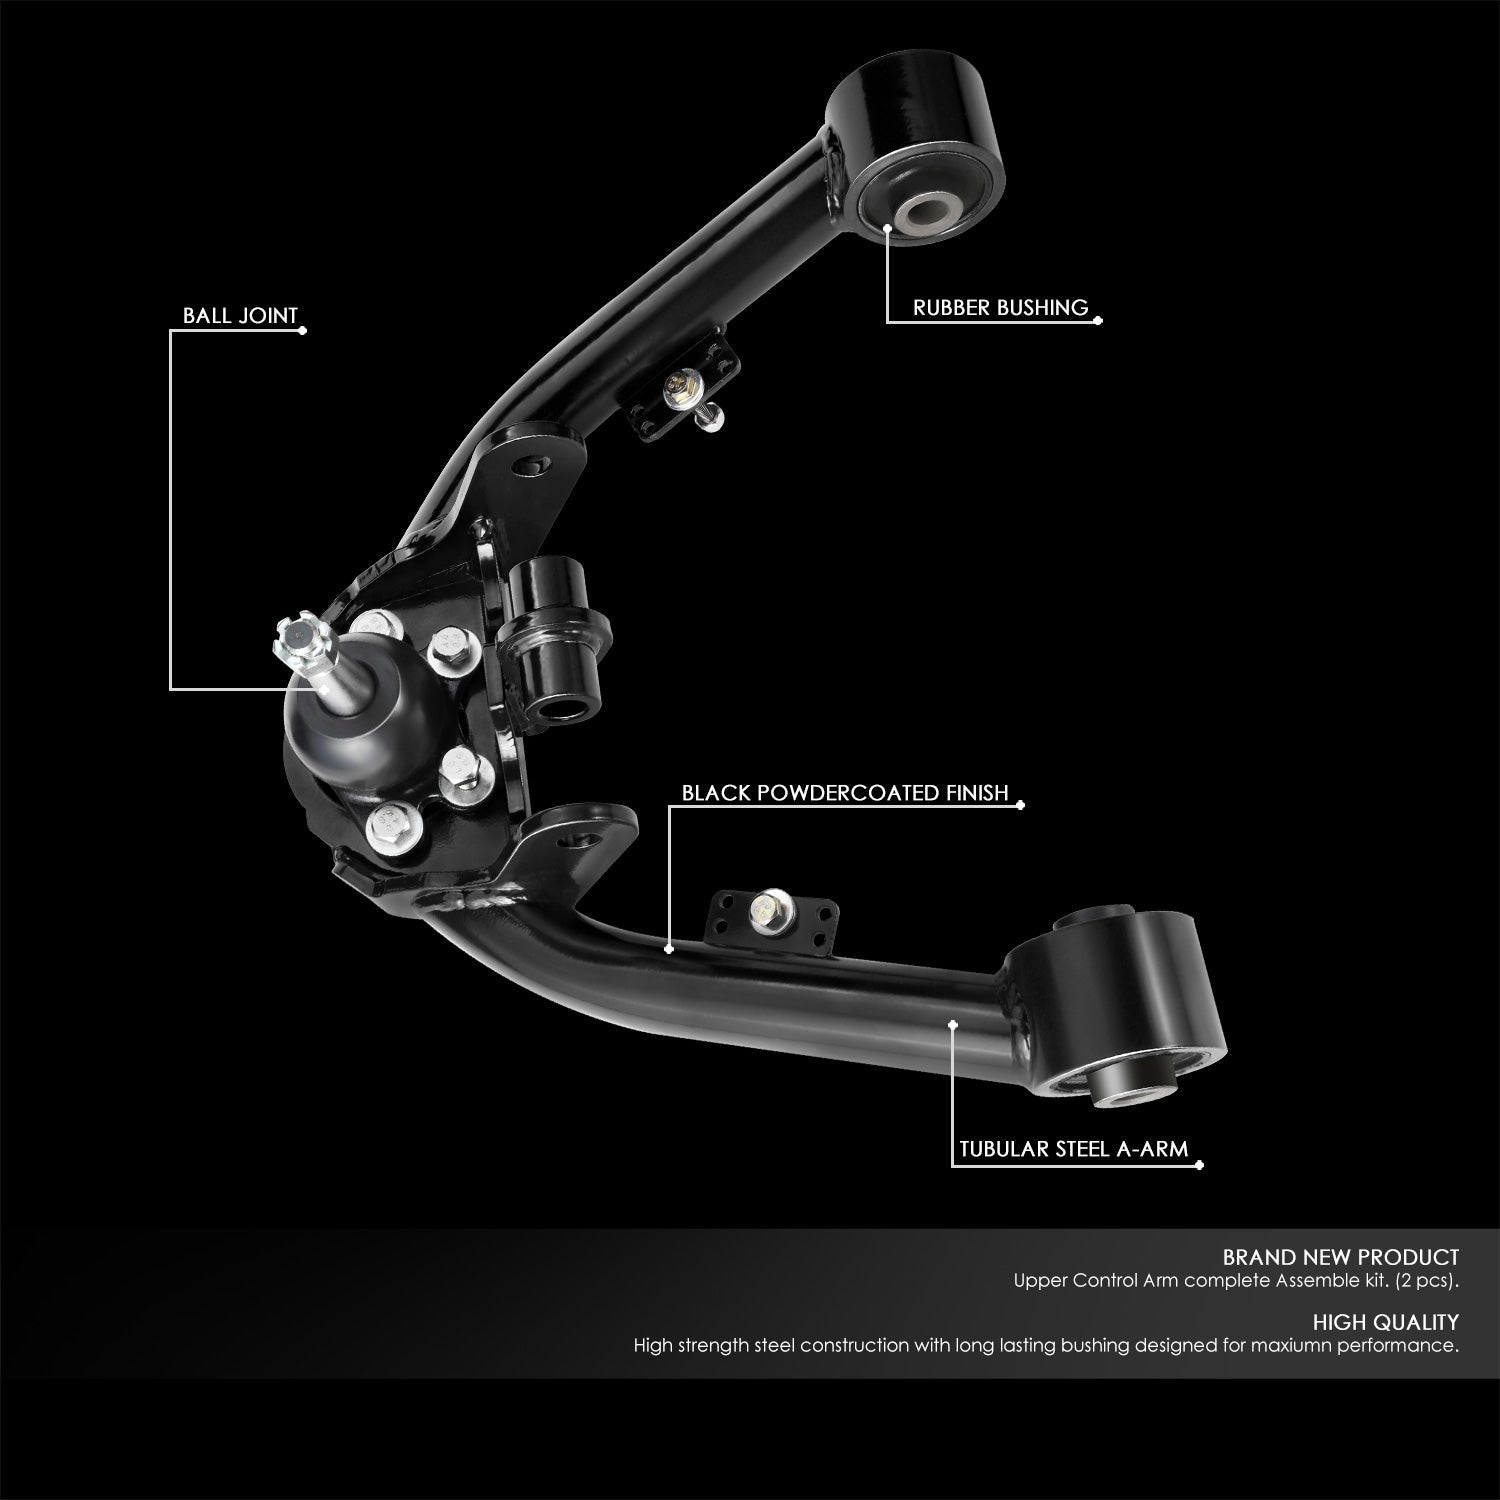 J2 Engineering, 19-22 Ram 1500 2-4 in. Lift Front Upper Control Arms w/Dual Shock Mount (Black)